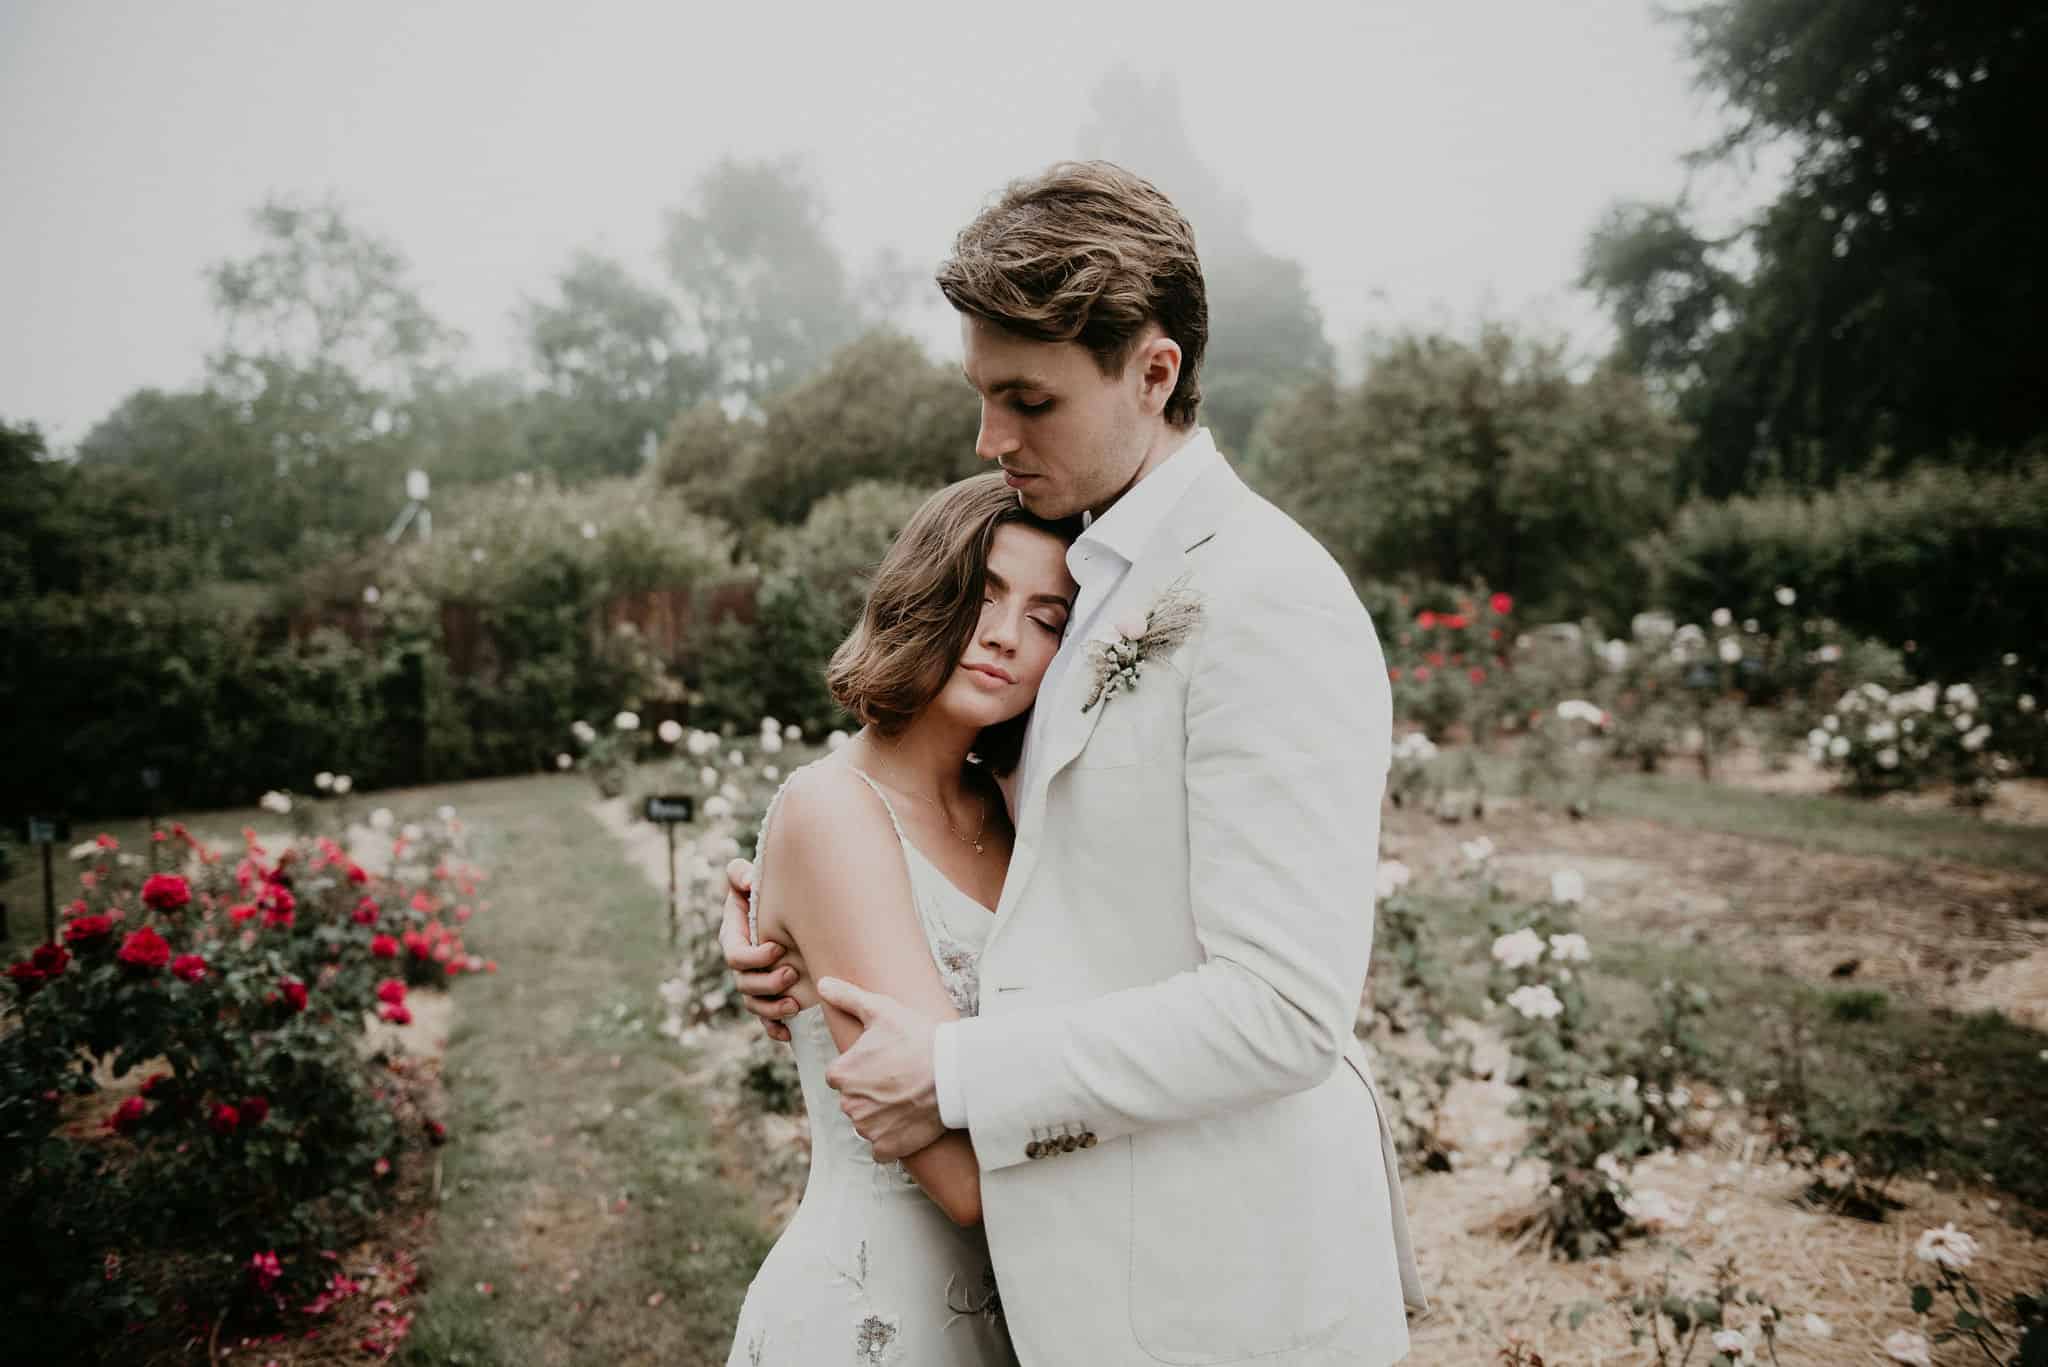 Couple hug in an intimate moment lovingly amongst the roses after beautiful wedding ceremony with Let's Elope Melbourne Celebrant Photography Elopement Package Victoria photographed by Sarah Matler Photography at Acre of Roses Trentham